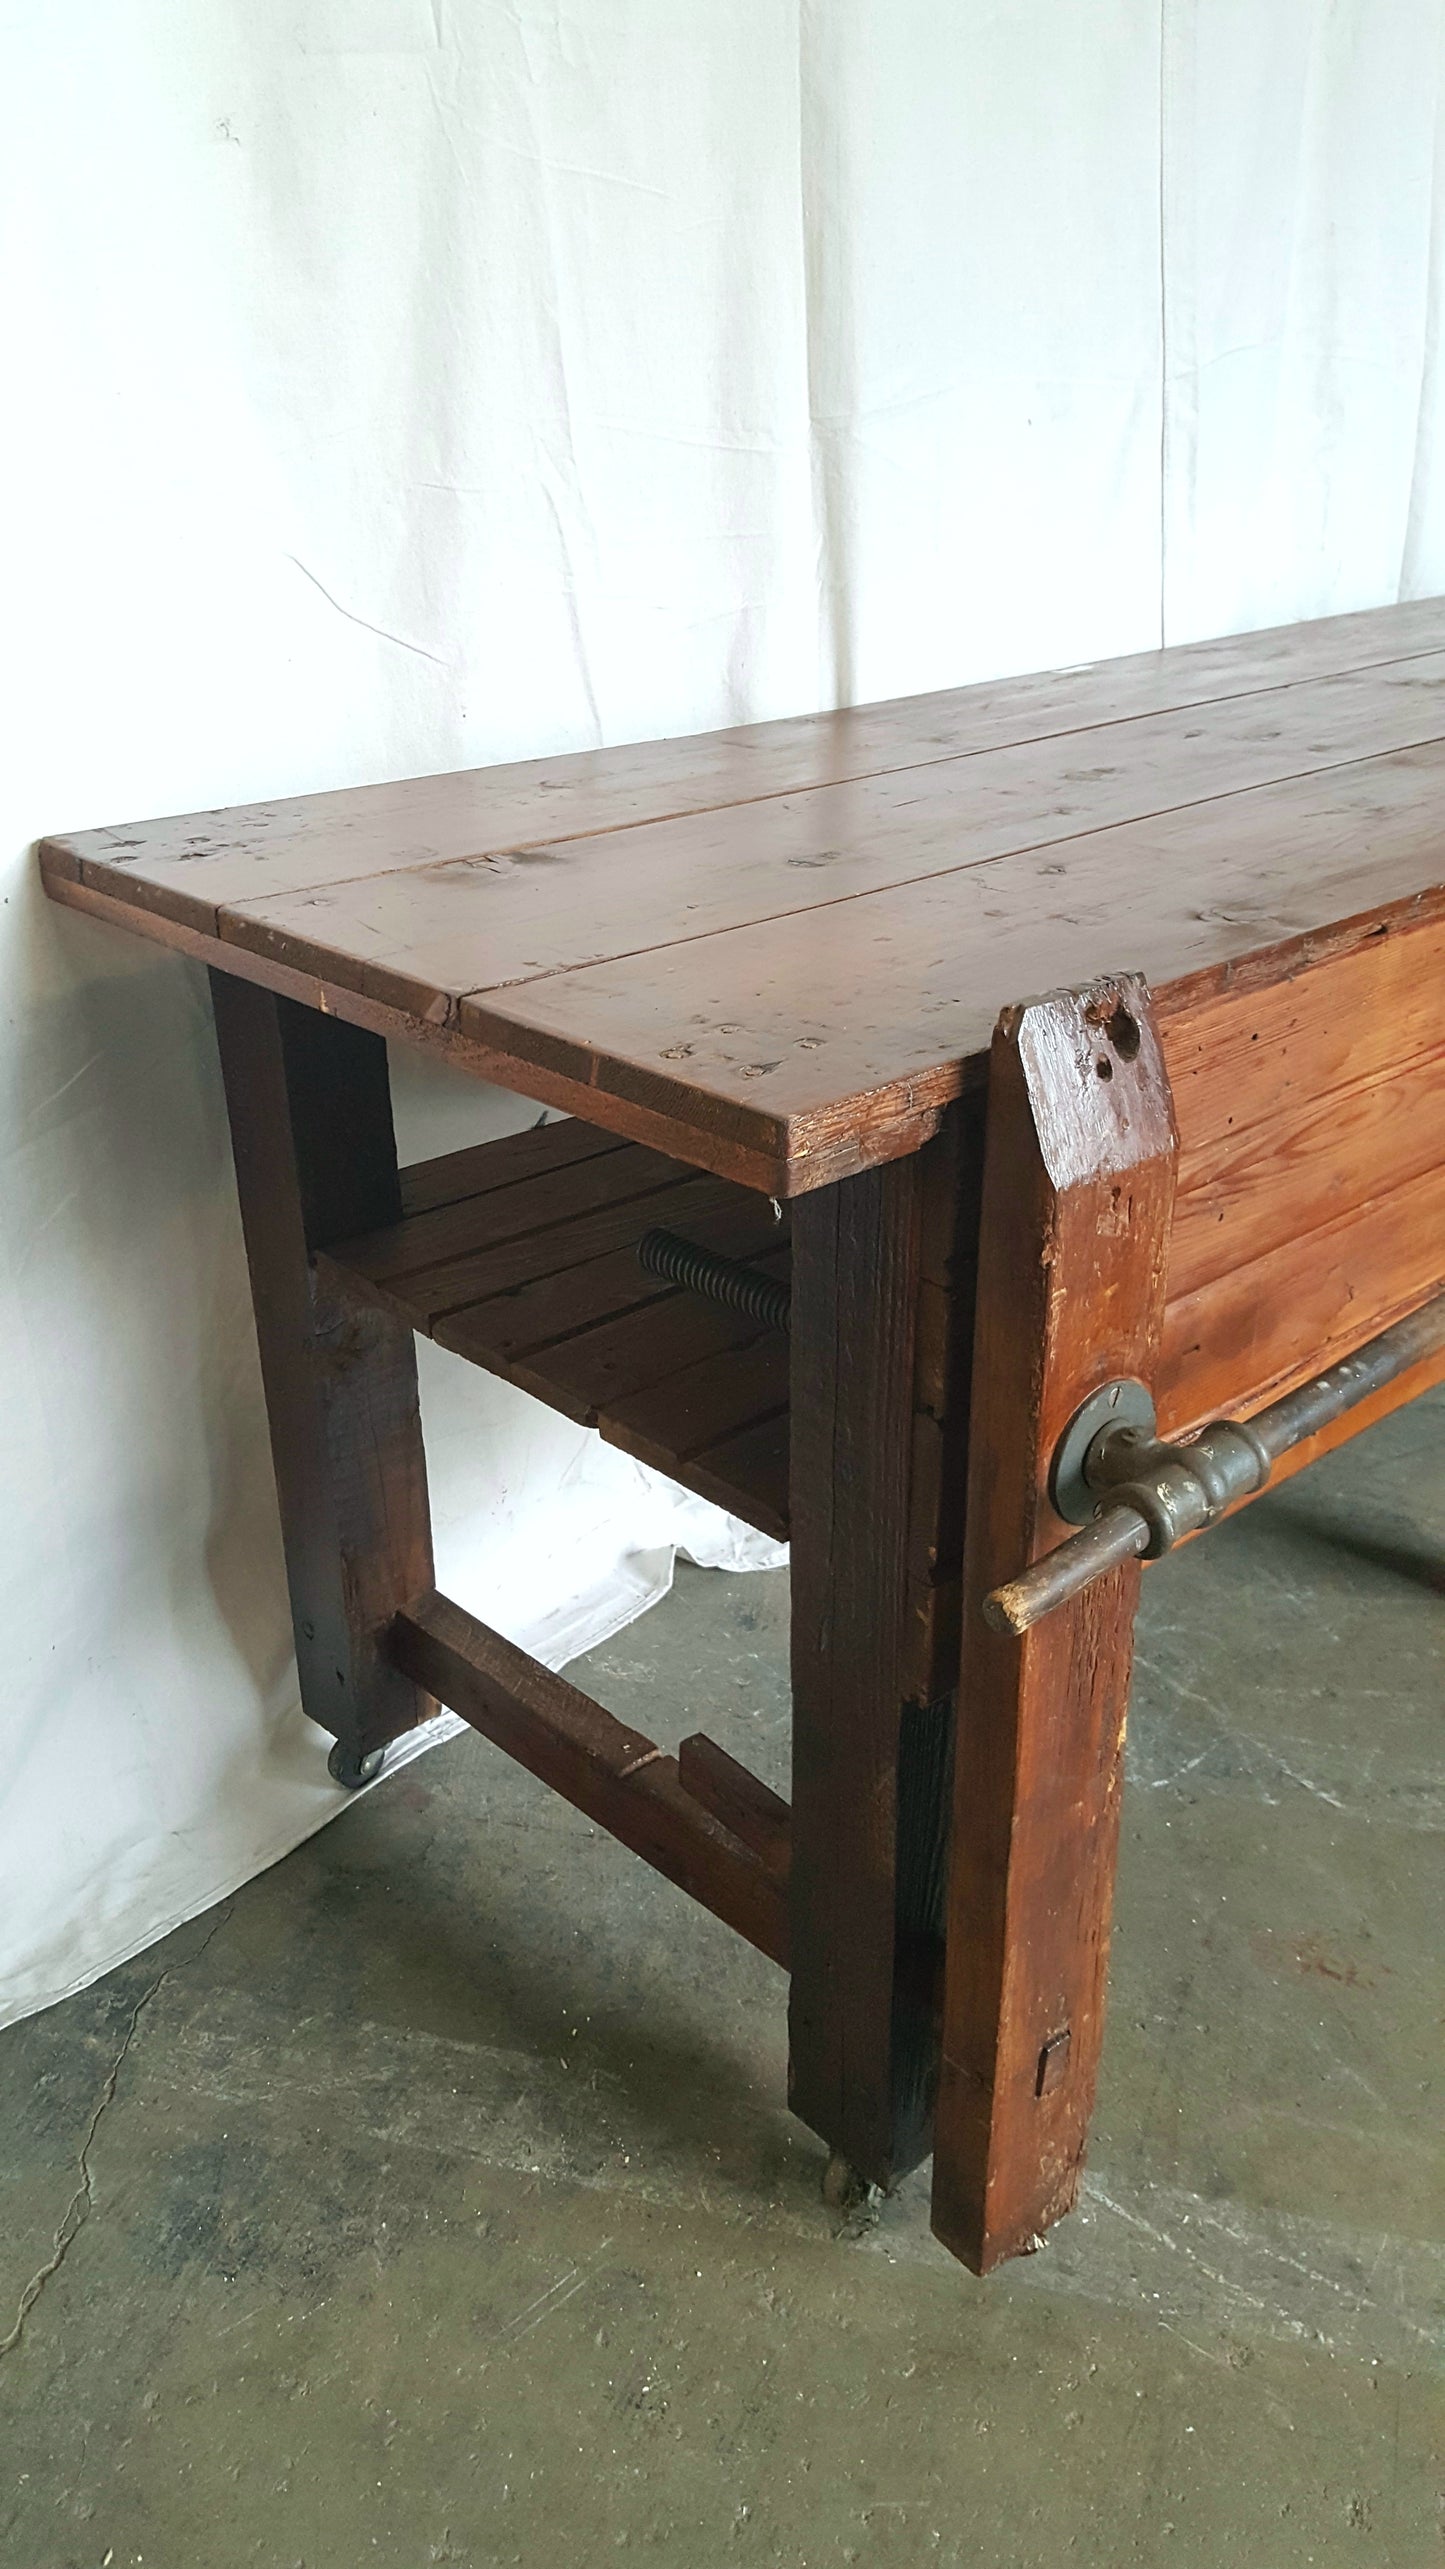 Antique Wood Work Table with Vise